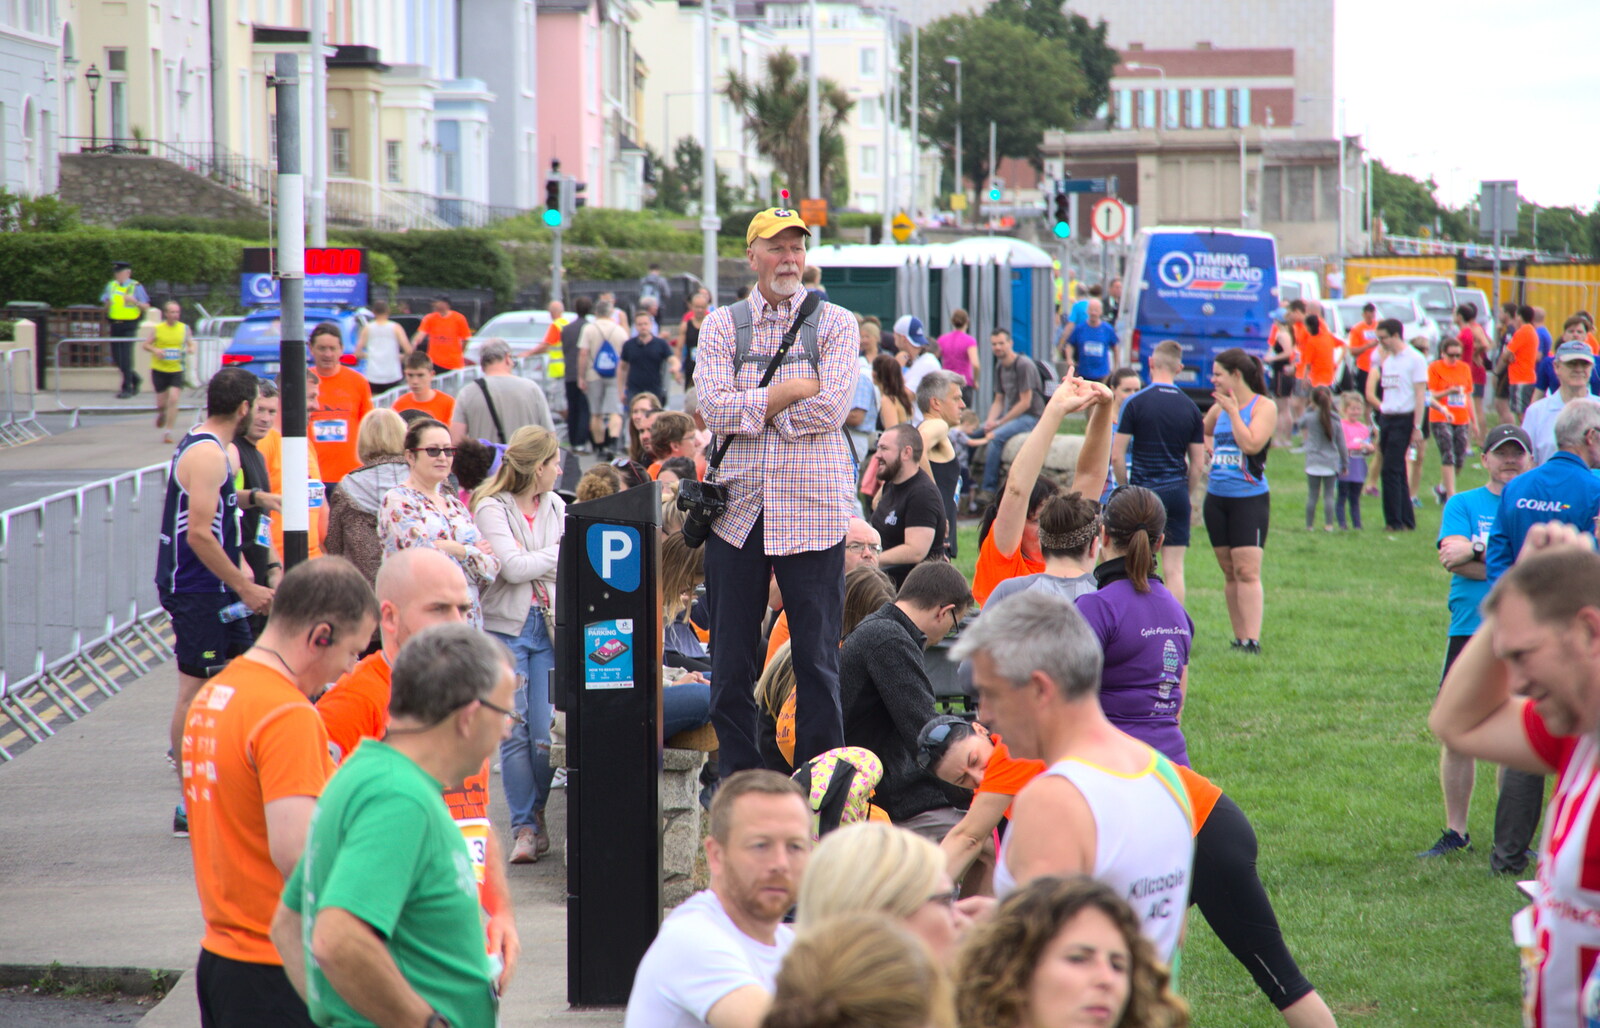 Some dude looks out over the sea of orange from The Dún Laoghaire 10k Run, County Dublin, Ireland - 6th August 2018